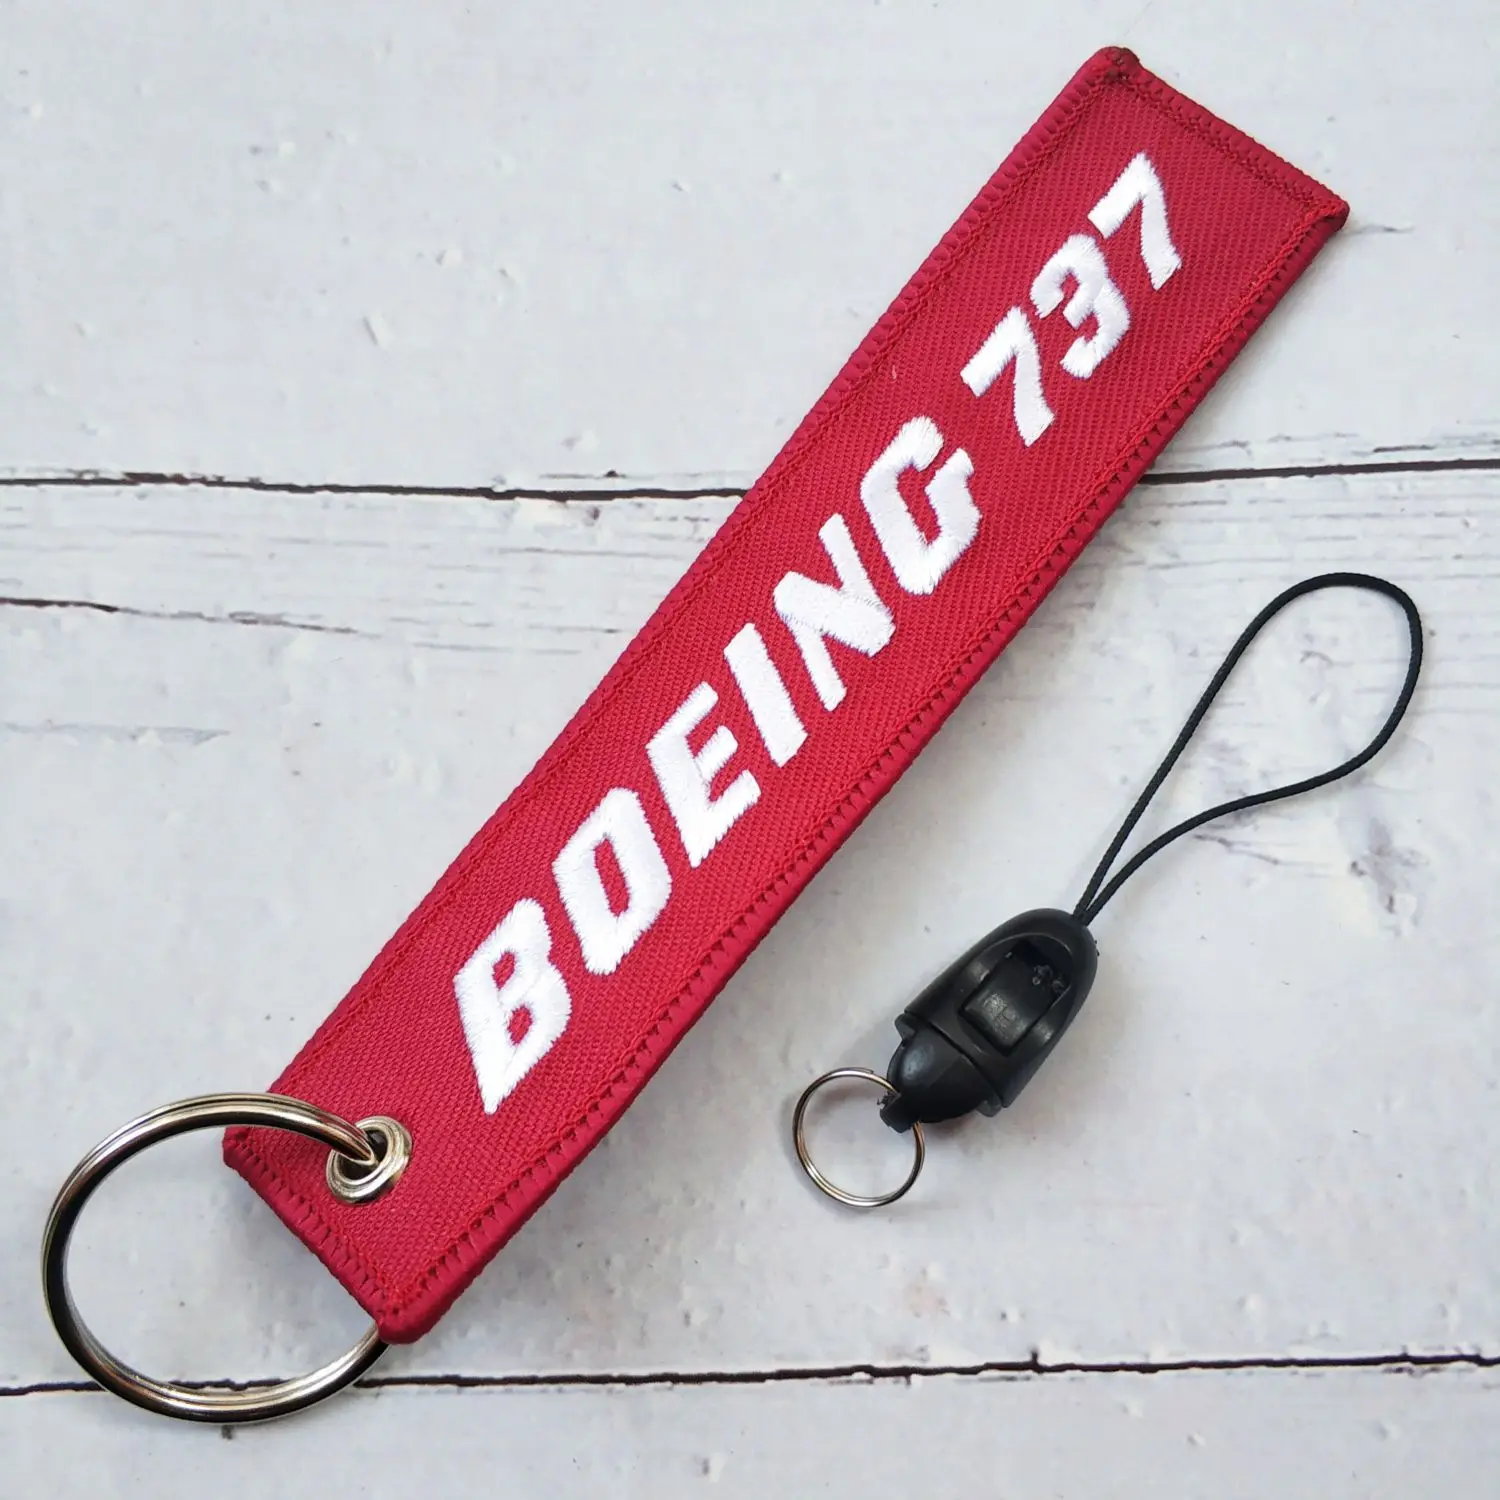 Red Embroidery Boeing 737 Phone Strap for iPhone Wrist Strap Lanyard for Keys Gym Phone Case Straps Badge Holder for Aviator